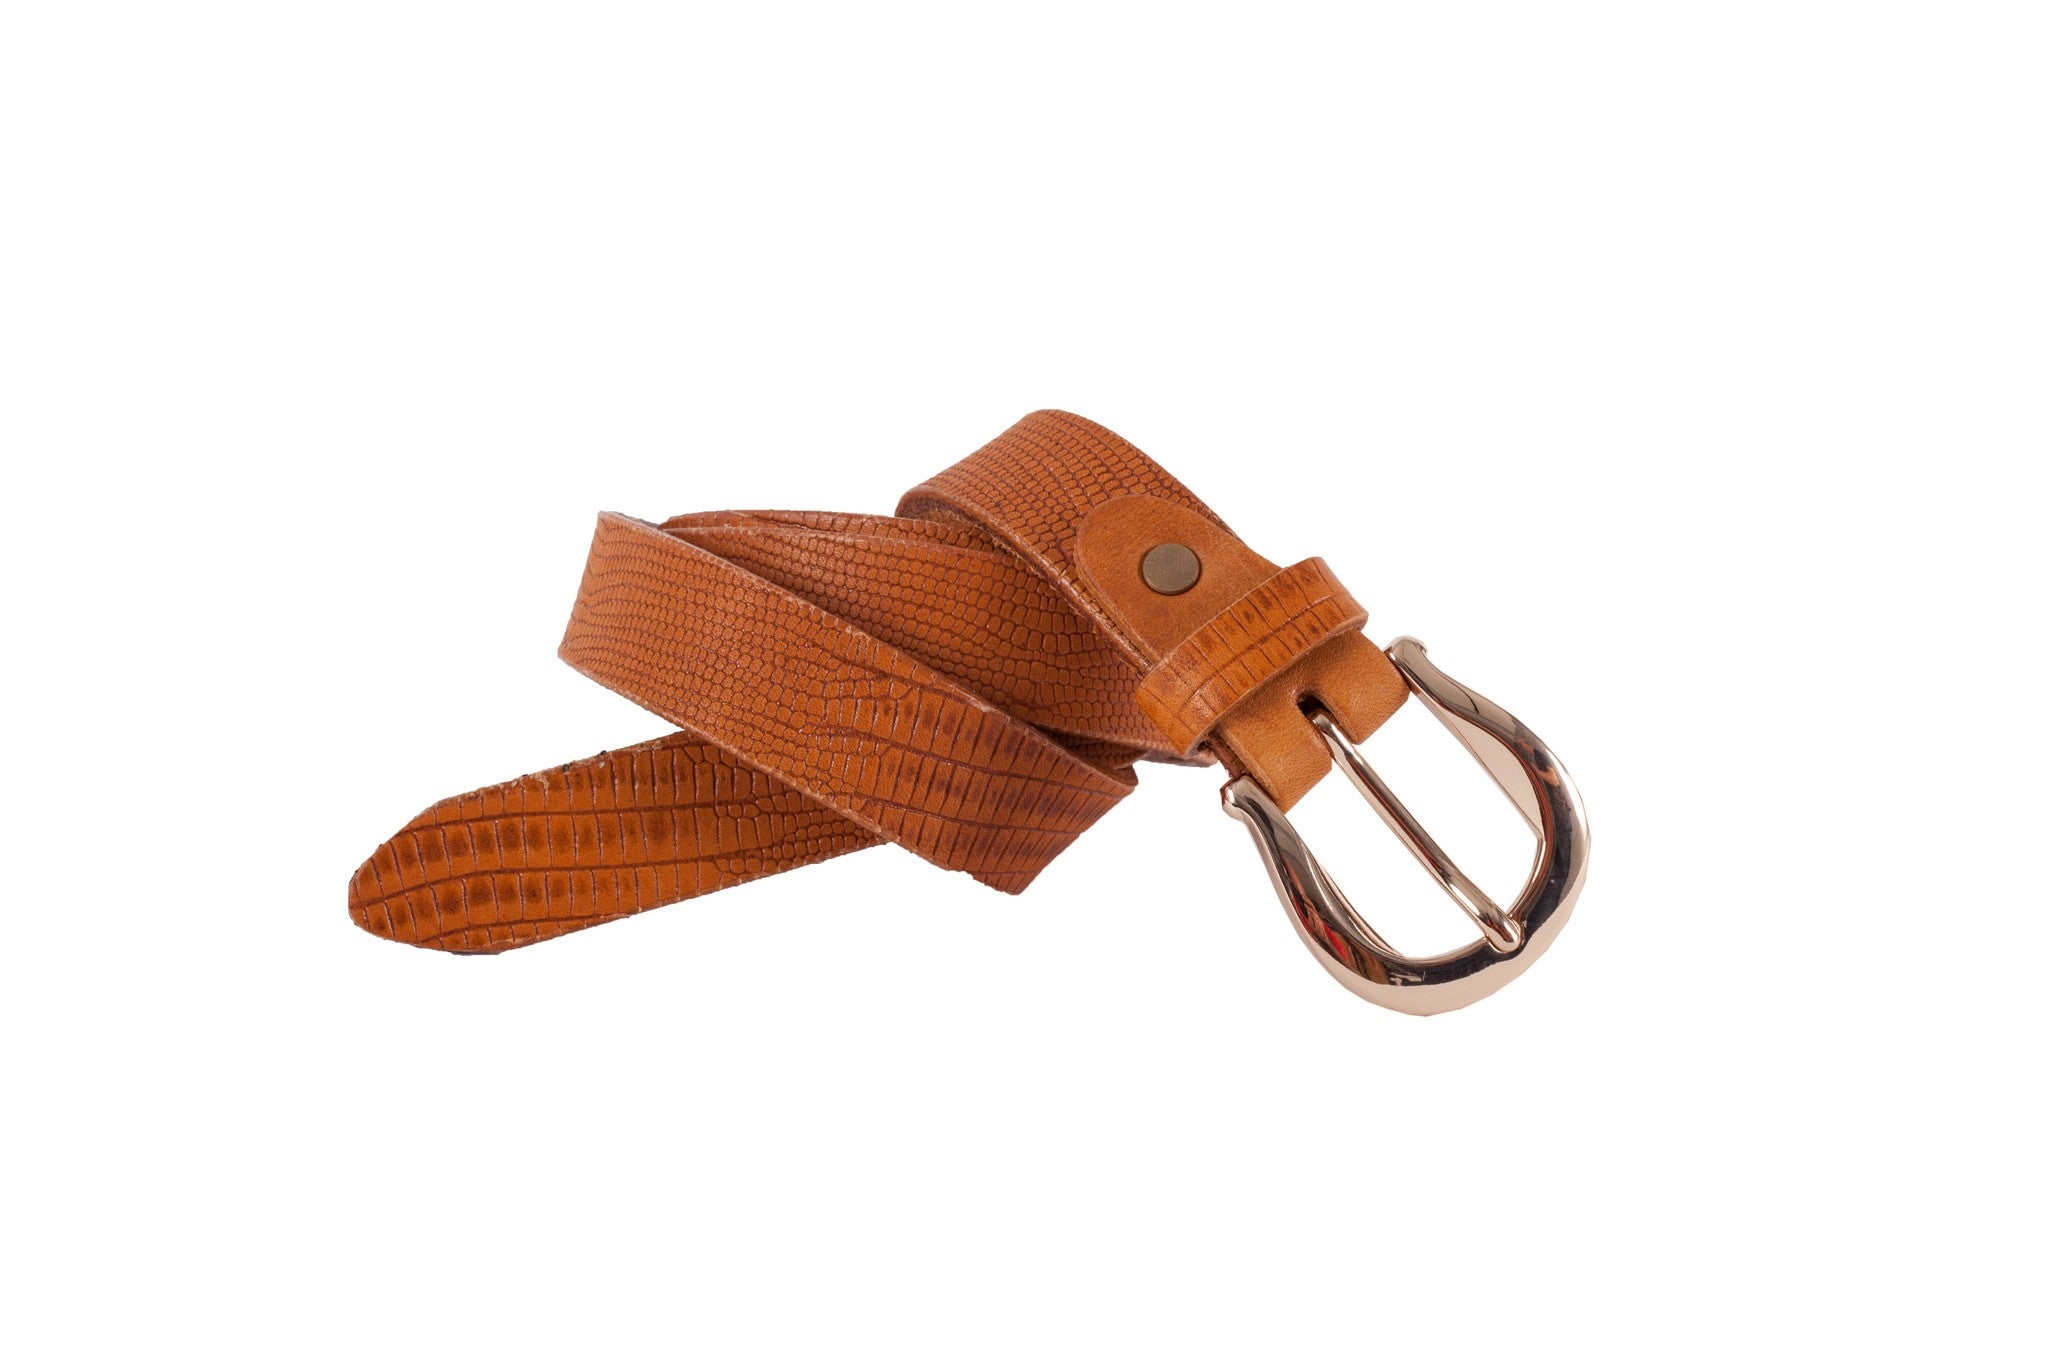 WW418/25 Belt in camel color with relief design with an beautiful 2.5cm width buckle